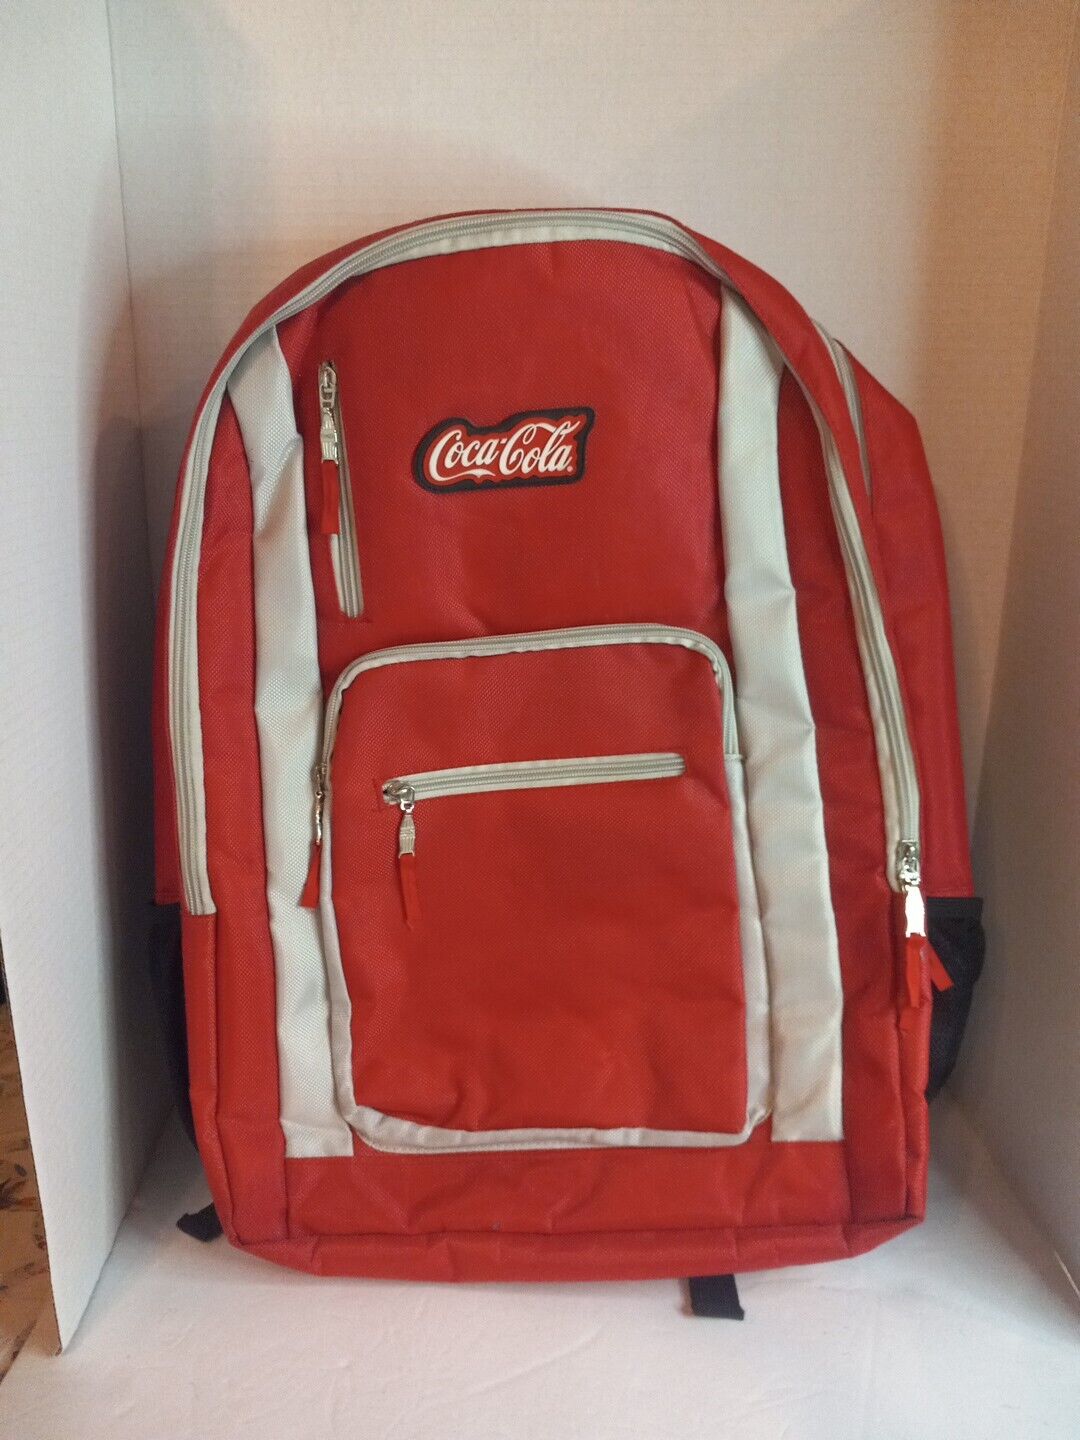 Vintage Retro Coca Cola Backpack Coke * Small Defects See Pics *